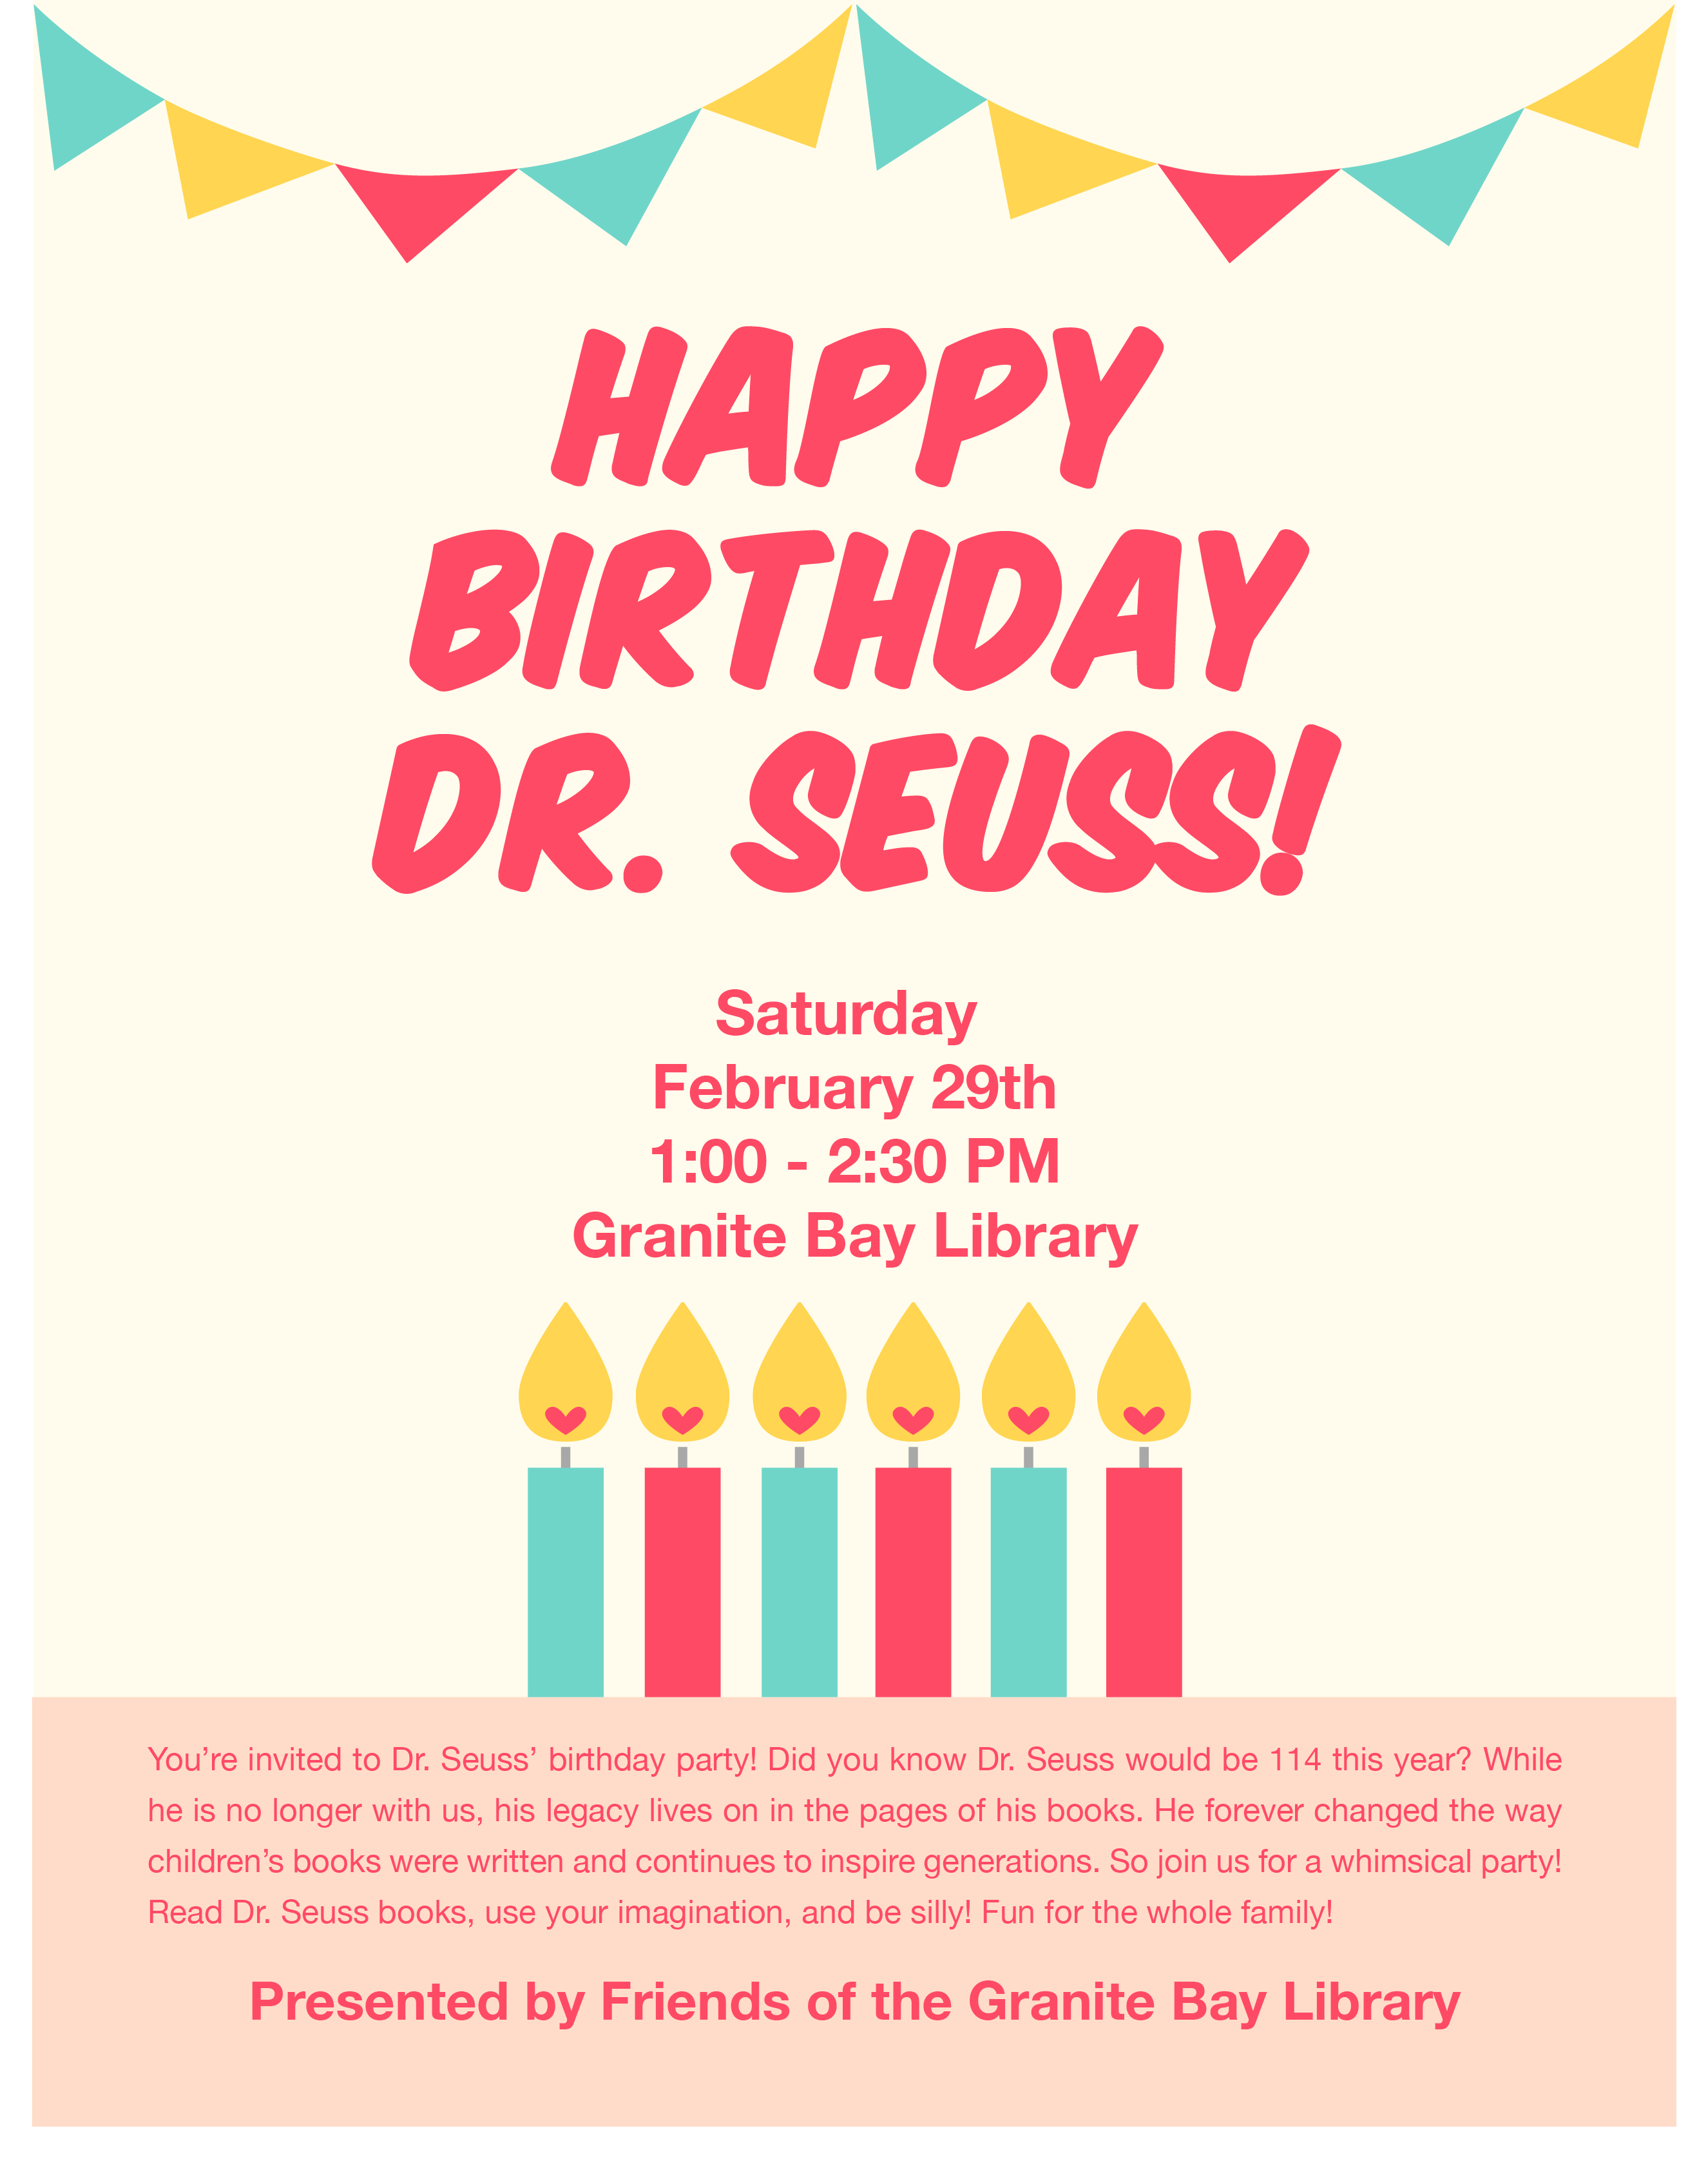 Dr Seuss Birthday Party Sat Feb 29th 2020 Friends Of The Granite Bay Library